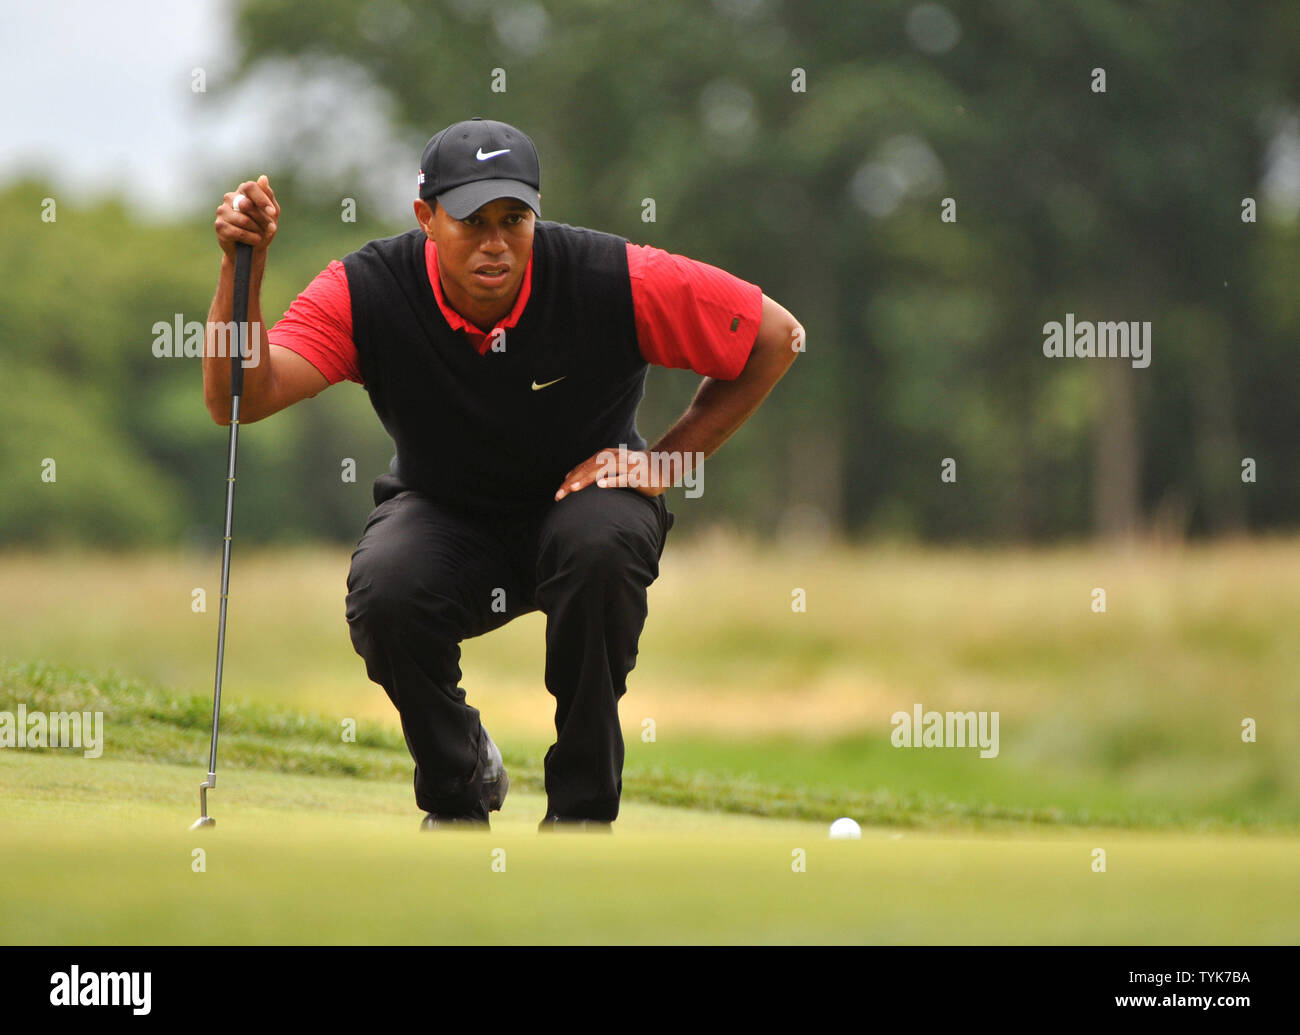 Tiger Woods lines up a putt on the 12th green during the final round of the U.S. Open at Bethpage Black in Farmingdale, New York on June 22, 2009. (UPI Photo/Kevin Dietsch) Stock Photo